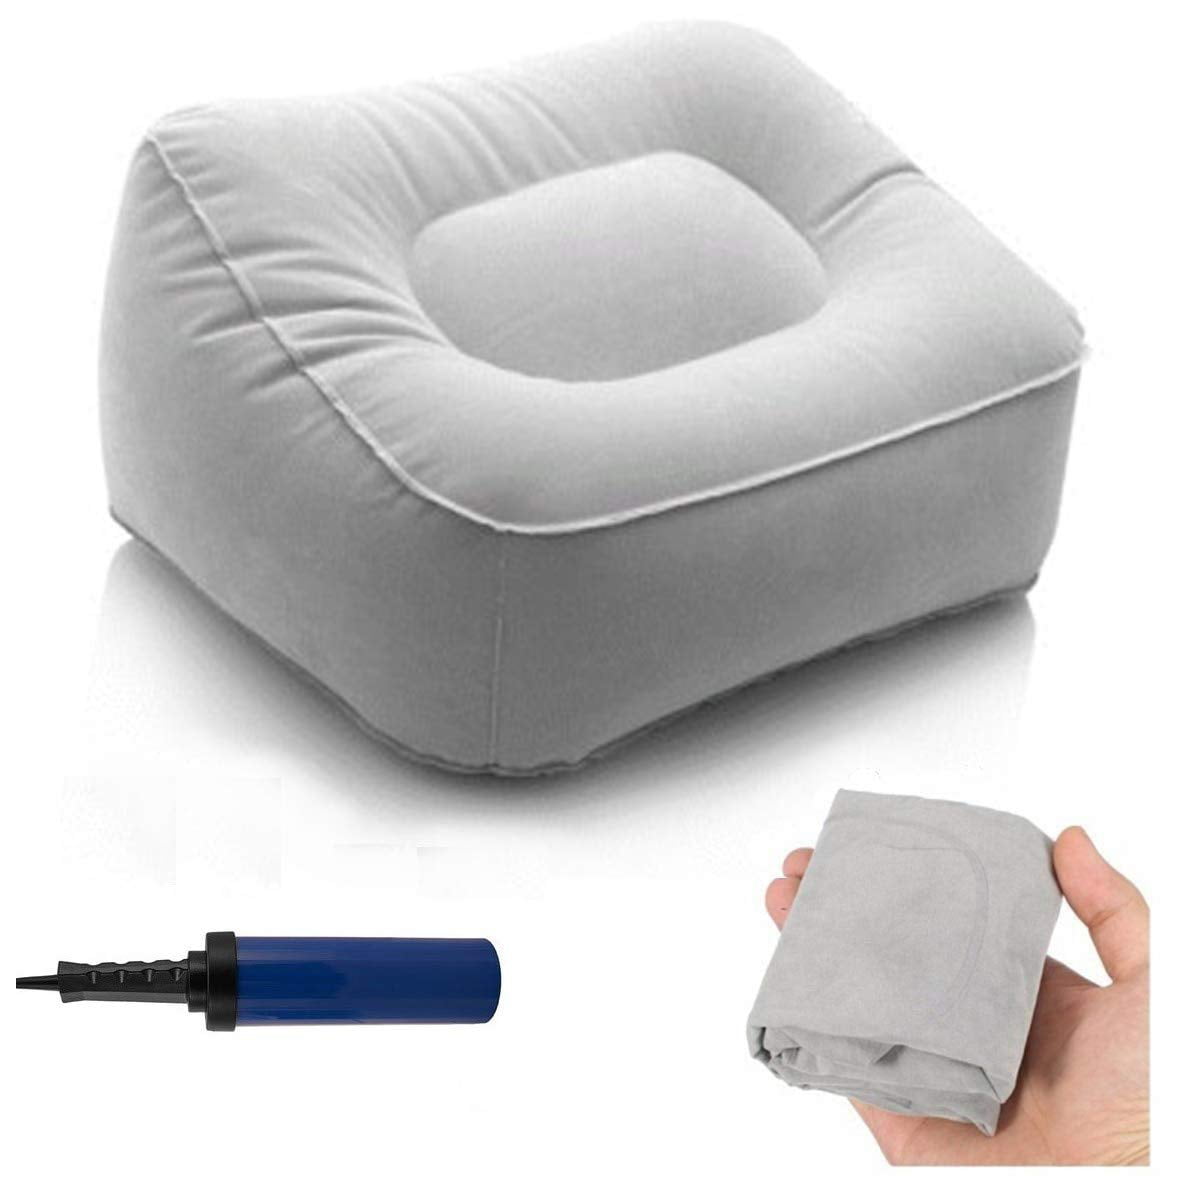 Legs Stretch or Curl Up Inflatable Travel Pillow Office Home Leg Up Footrest